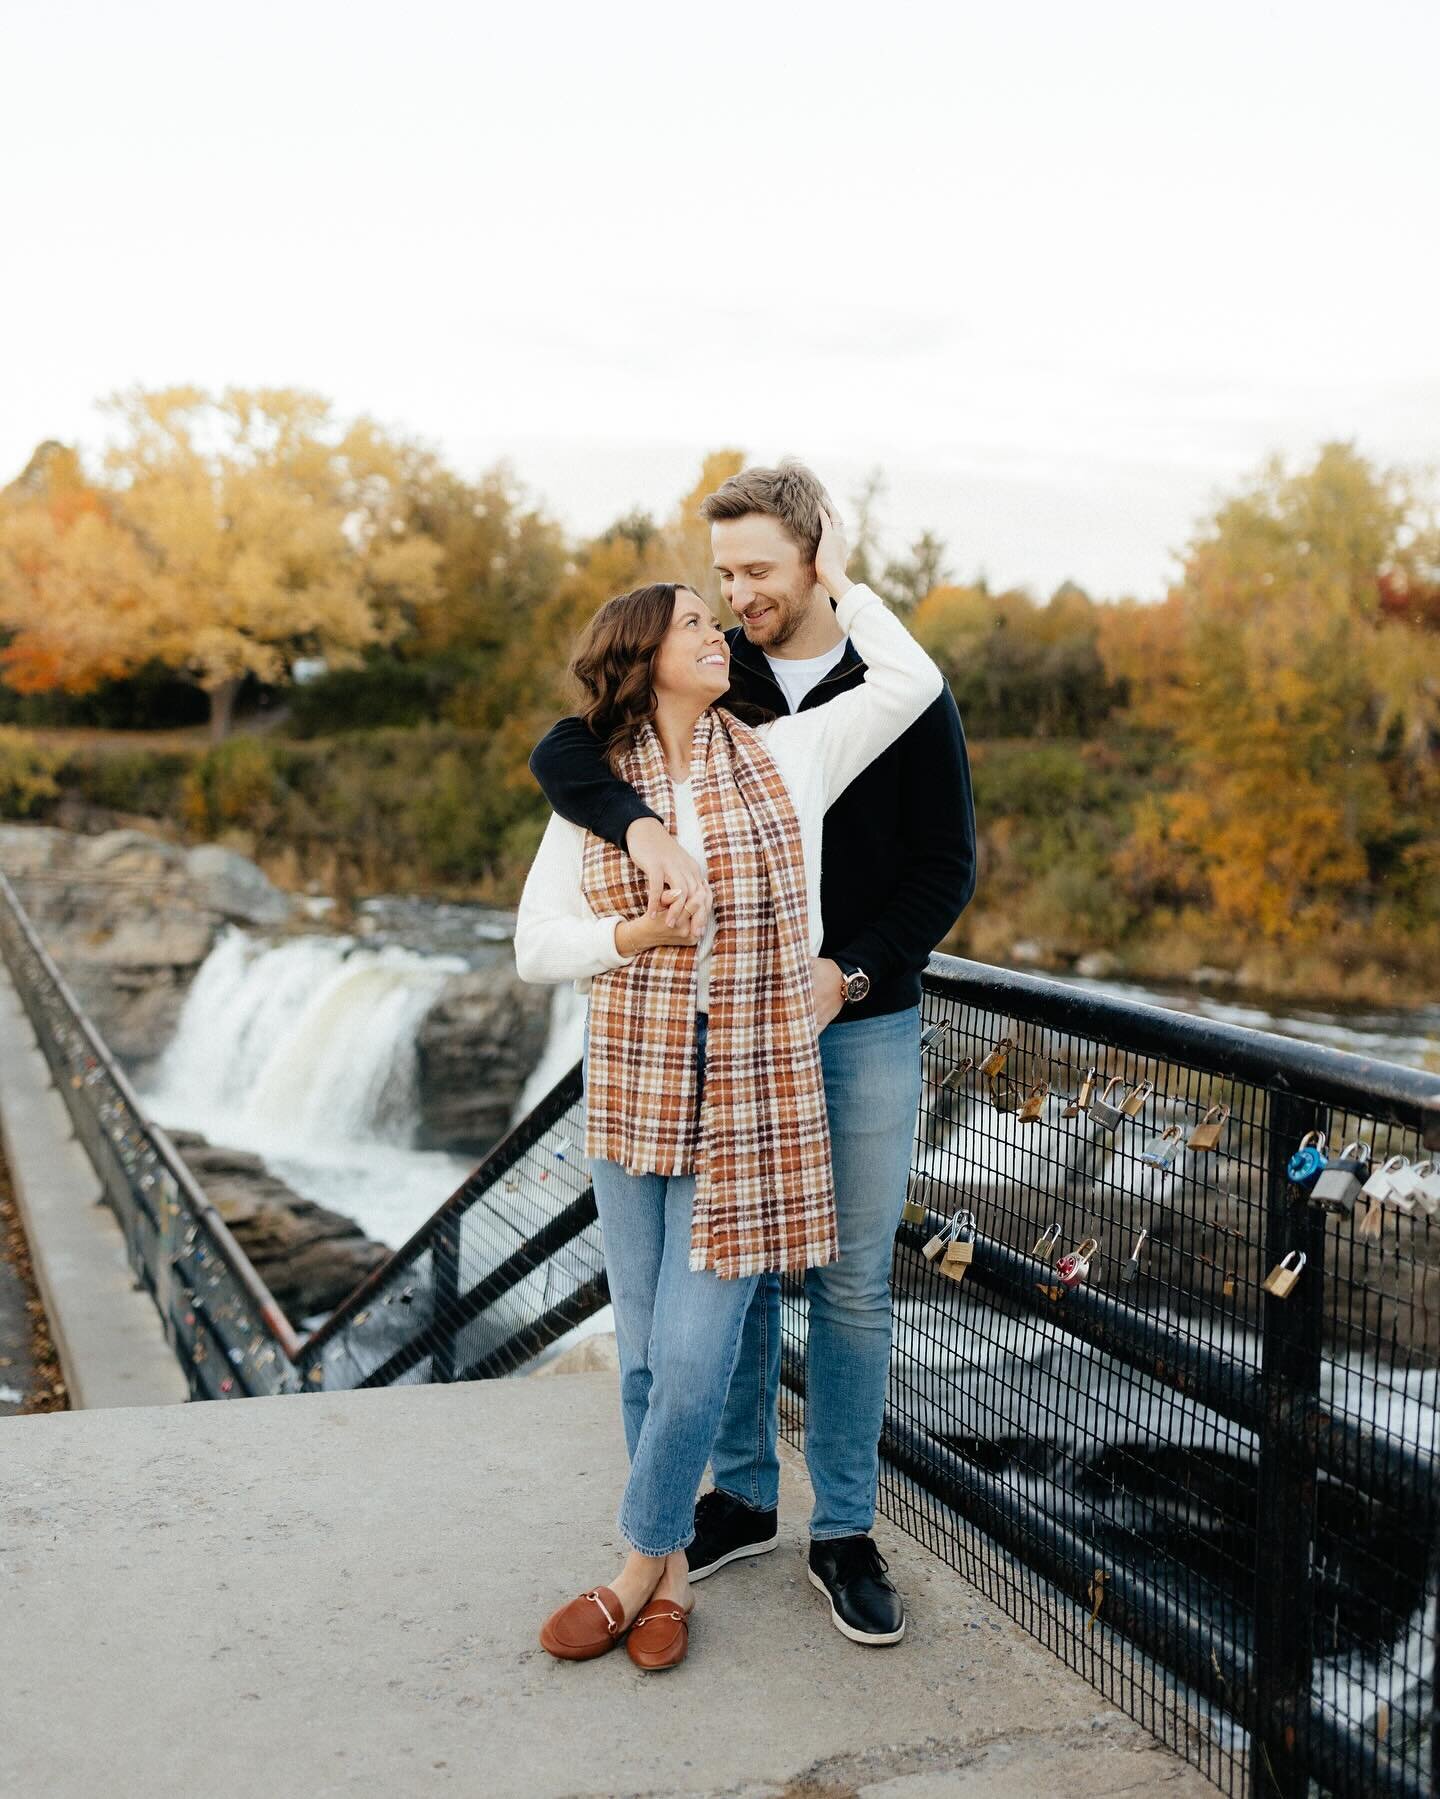 Sneak peeks from Kait + Mitch&rsquo;s engagement session on Tuesday (aka, the best day of the week for me!!!)🍂
&bull;
Tuesdays are the evenings I reserve for engagement sessions and I can&rsquo;t believe I only have ONE more Tuesday left of shooting